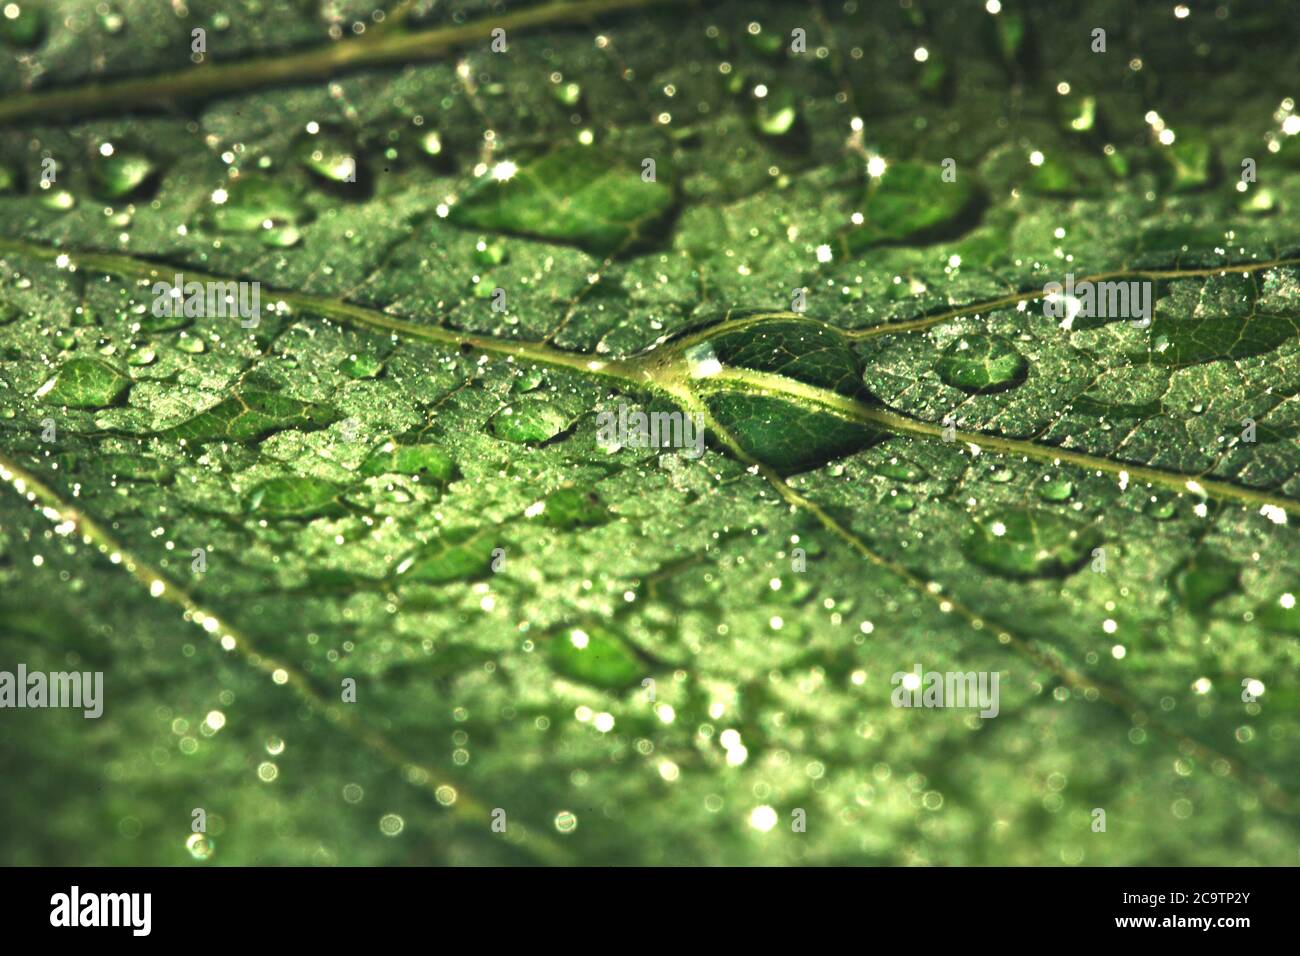 detail of leaf with drops of water Stock Photo